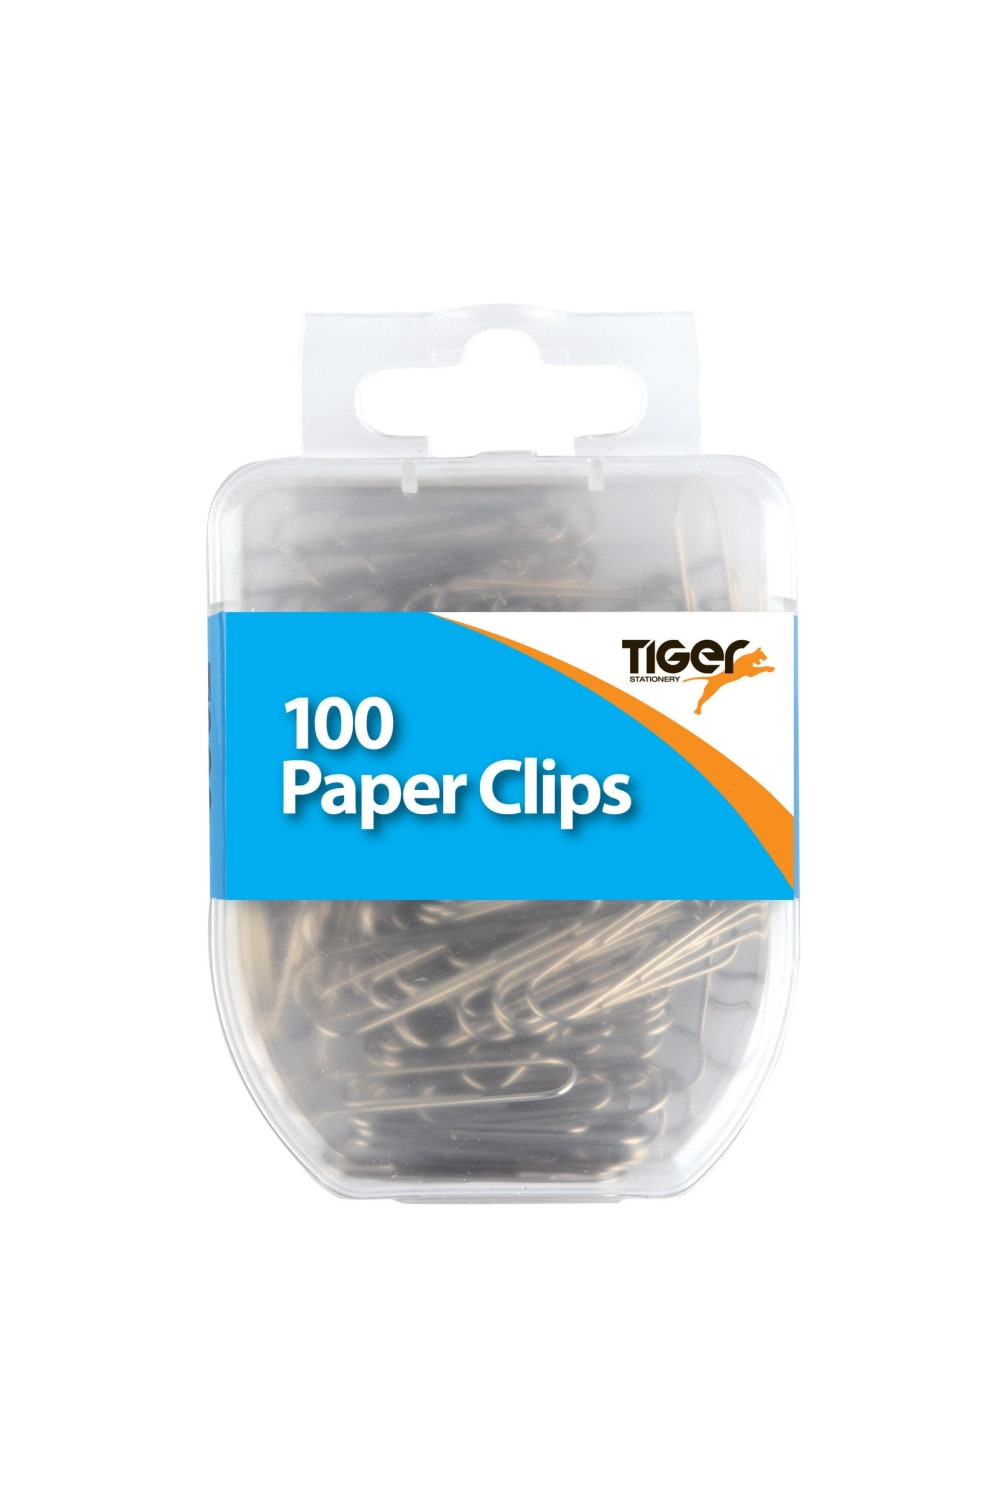 Tiger Stationery Paper Clips (Pack of 100) (Silver) (One Size)